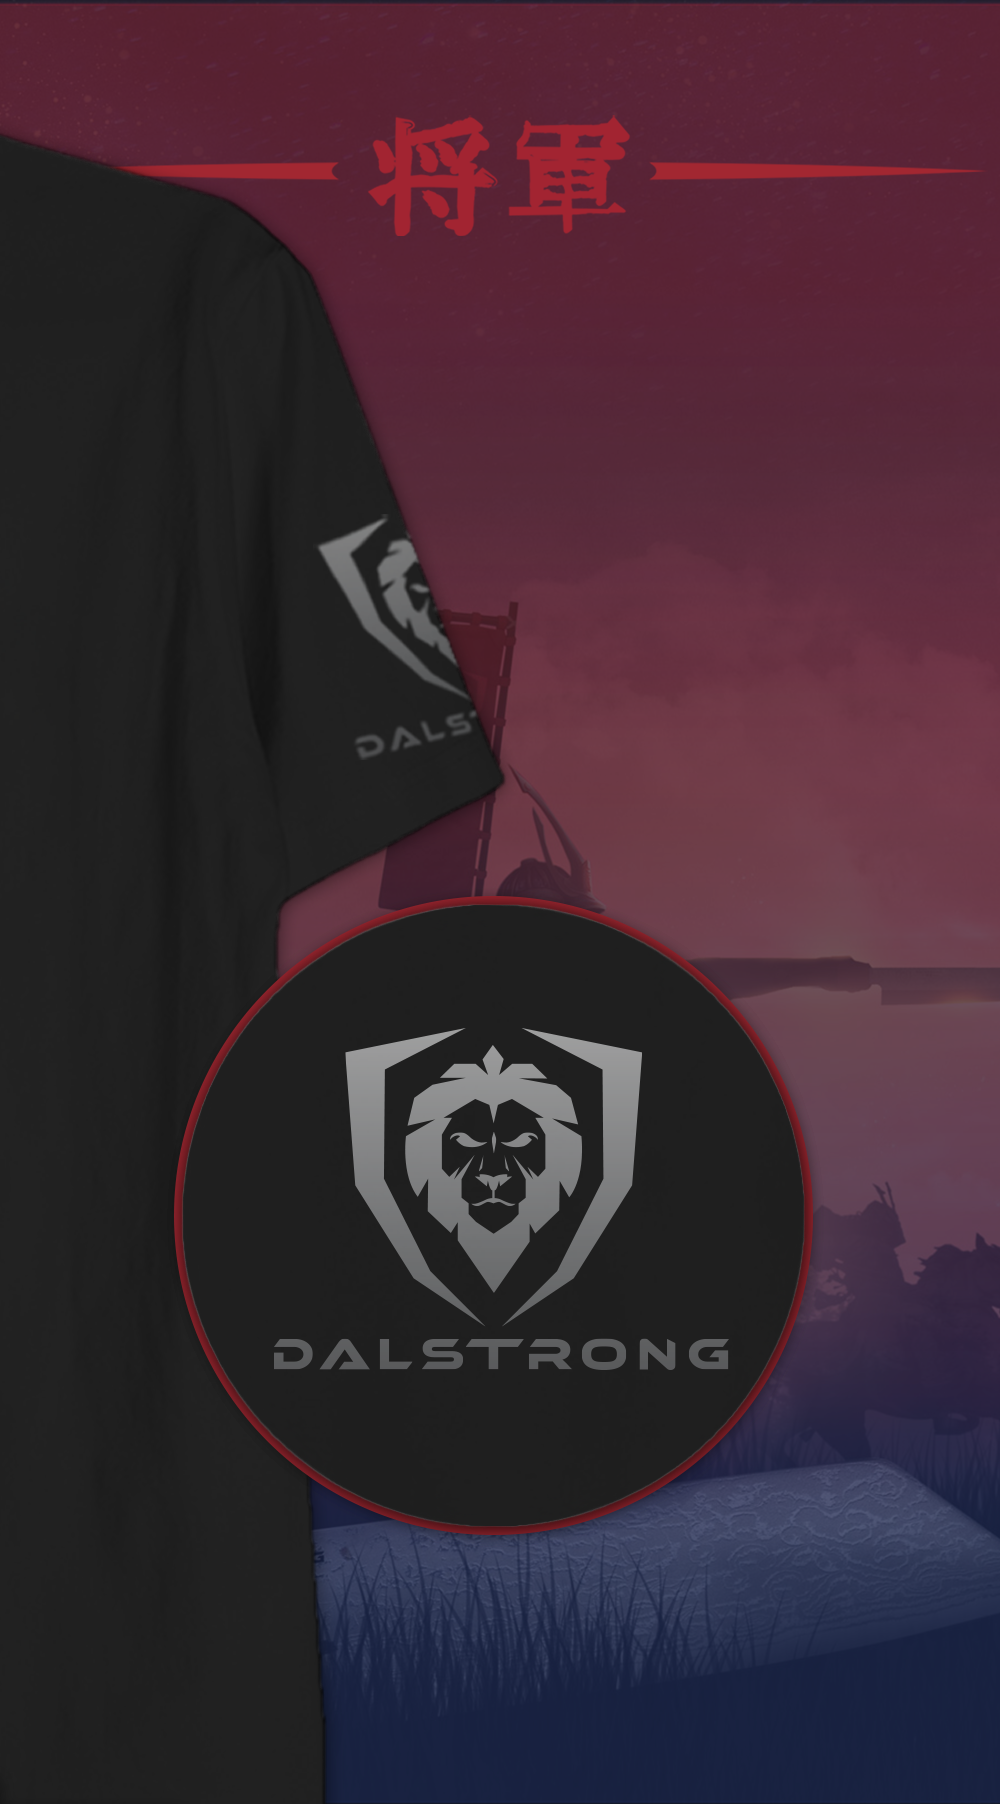 Dalstrong the shogun series blades up tee black with dalstrong name and logo.